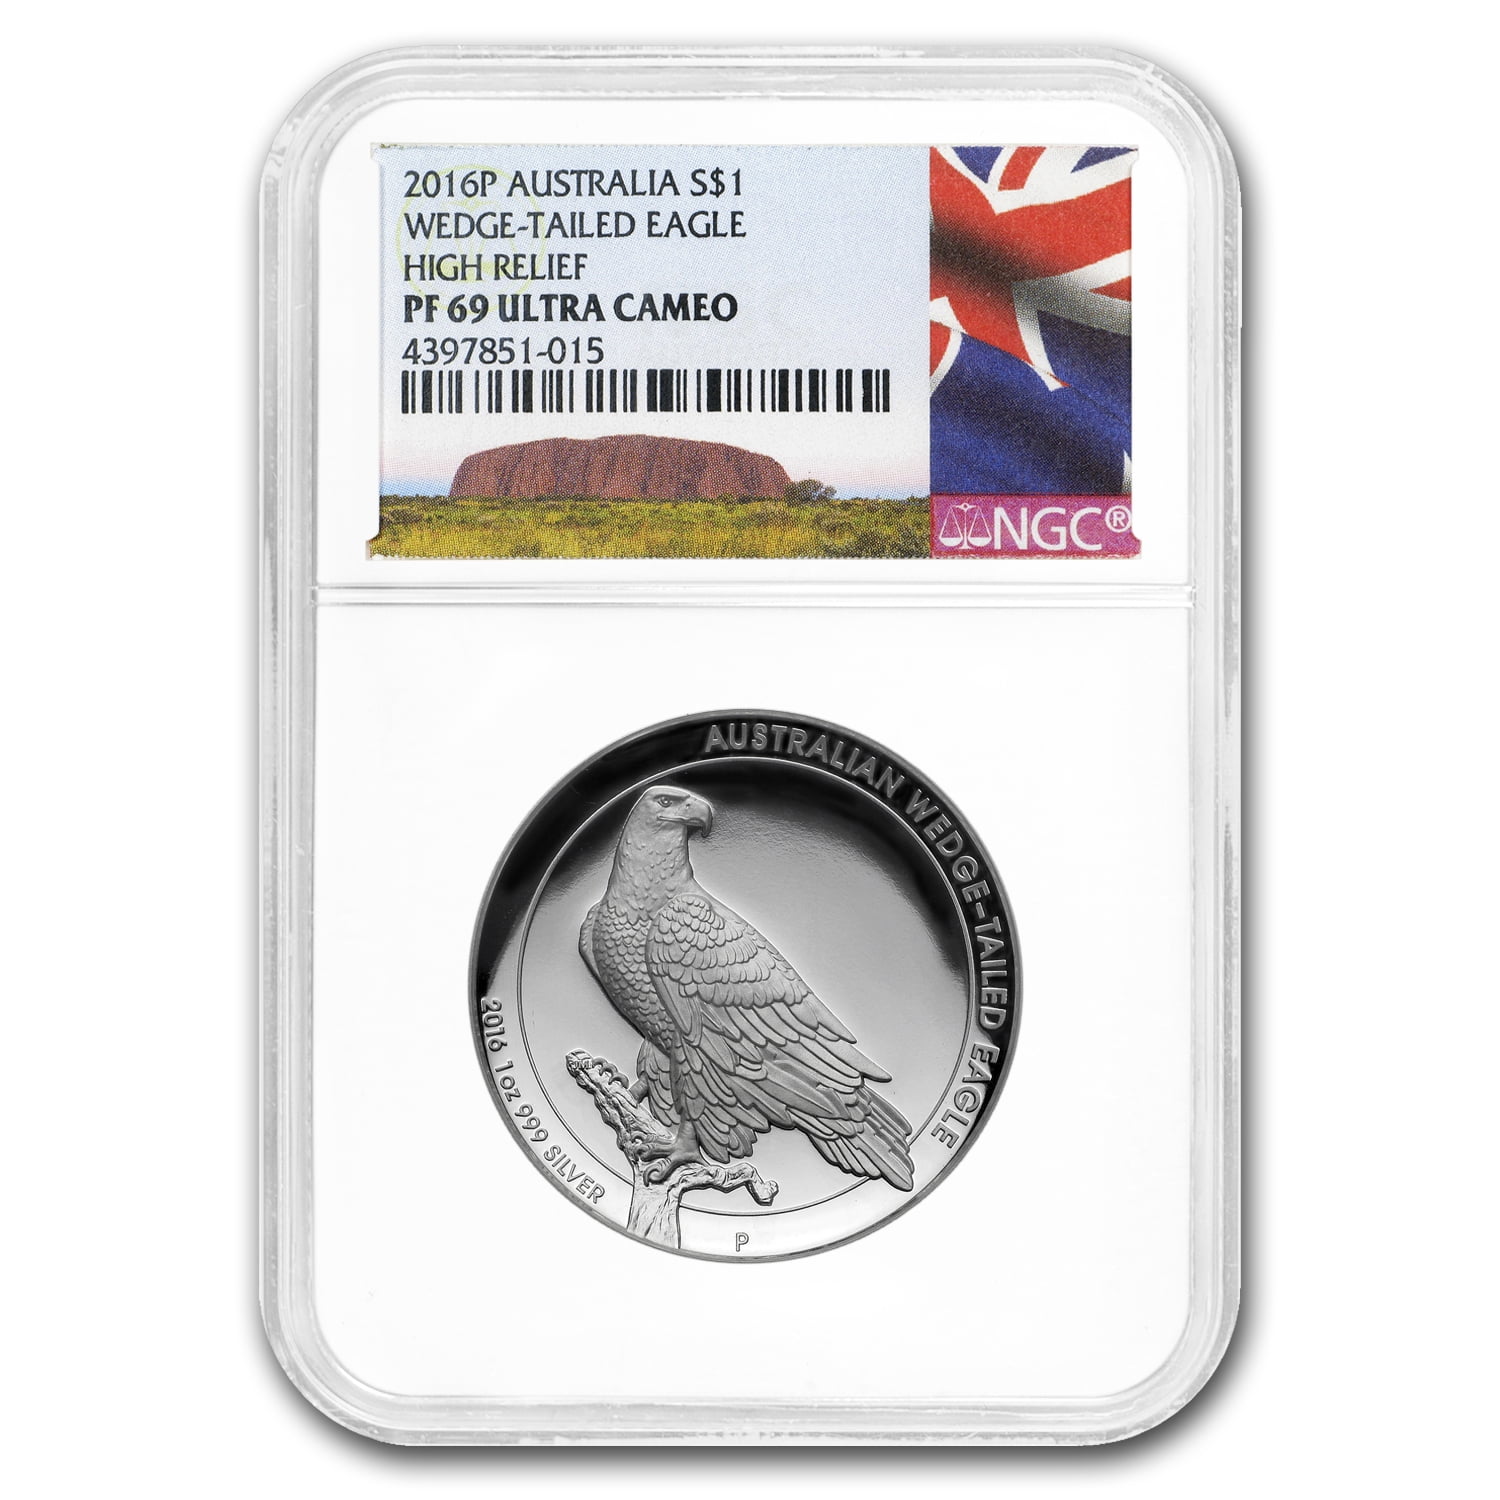 from mint roll 2016 Australia 1 oz Perth .999 Silver Wedge Tailed Eagle